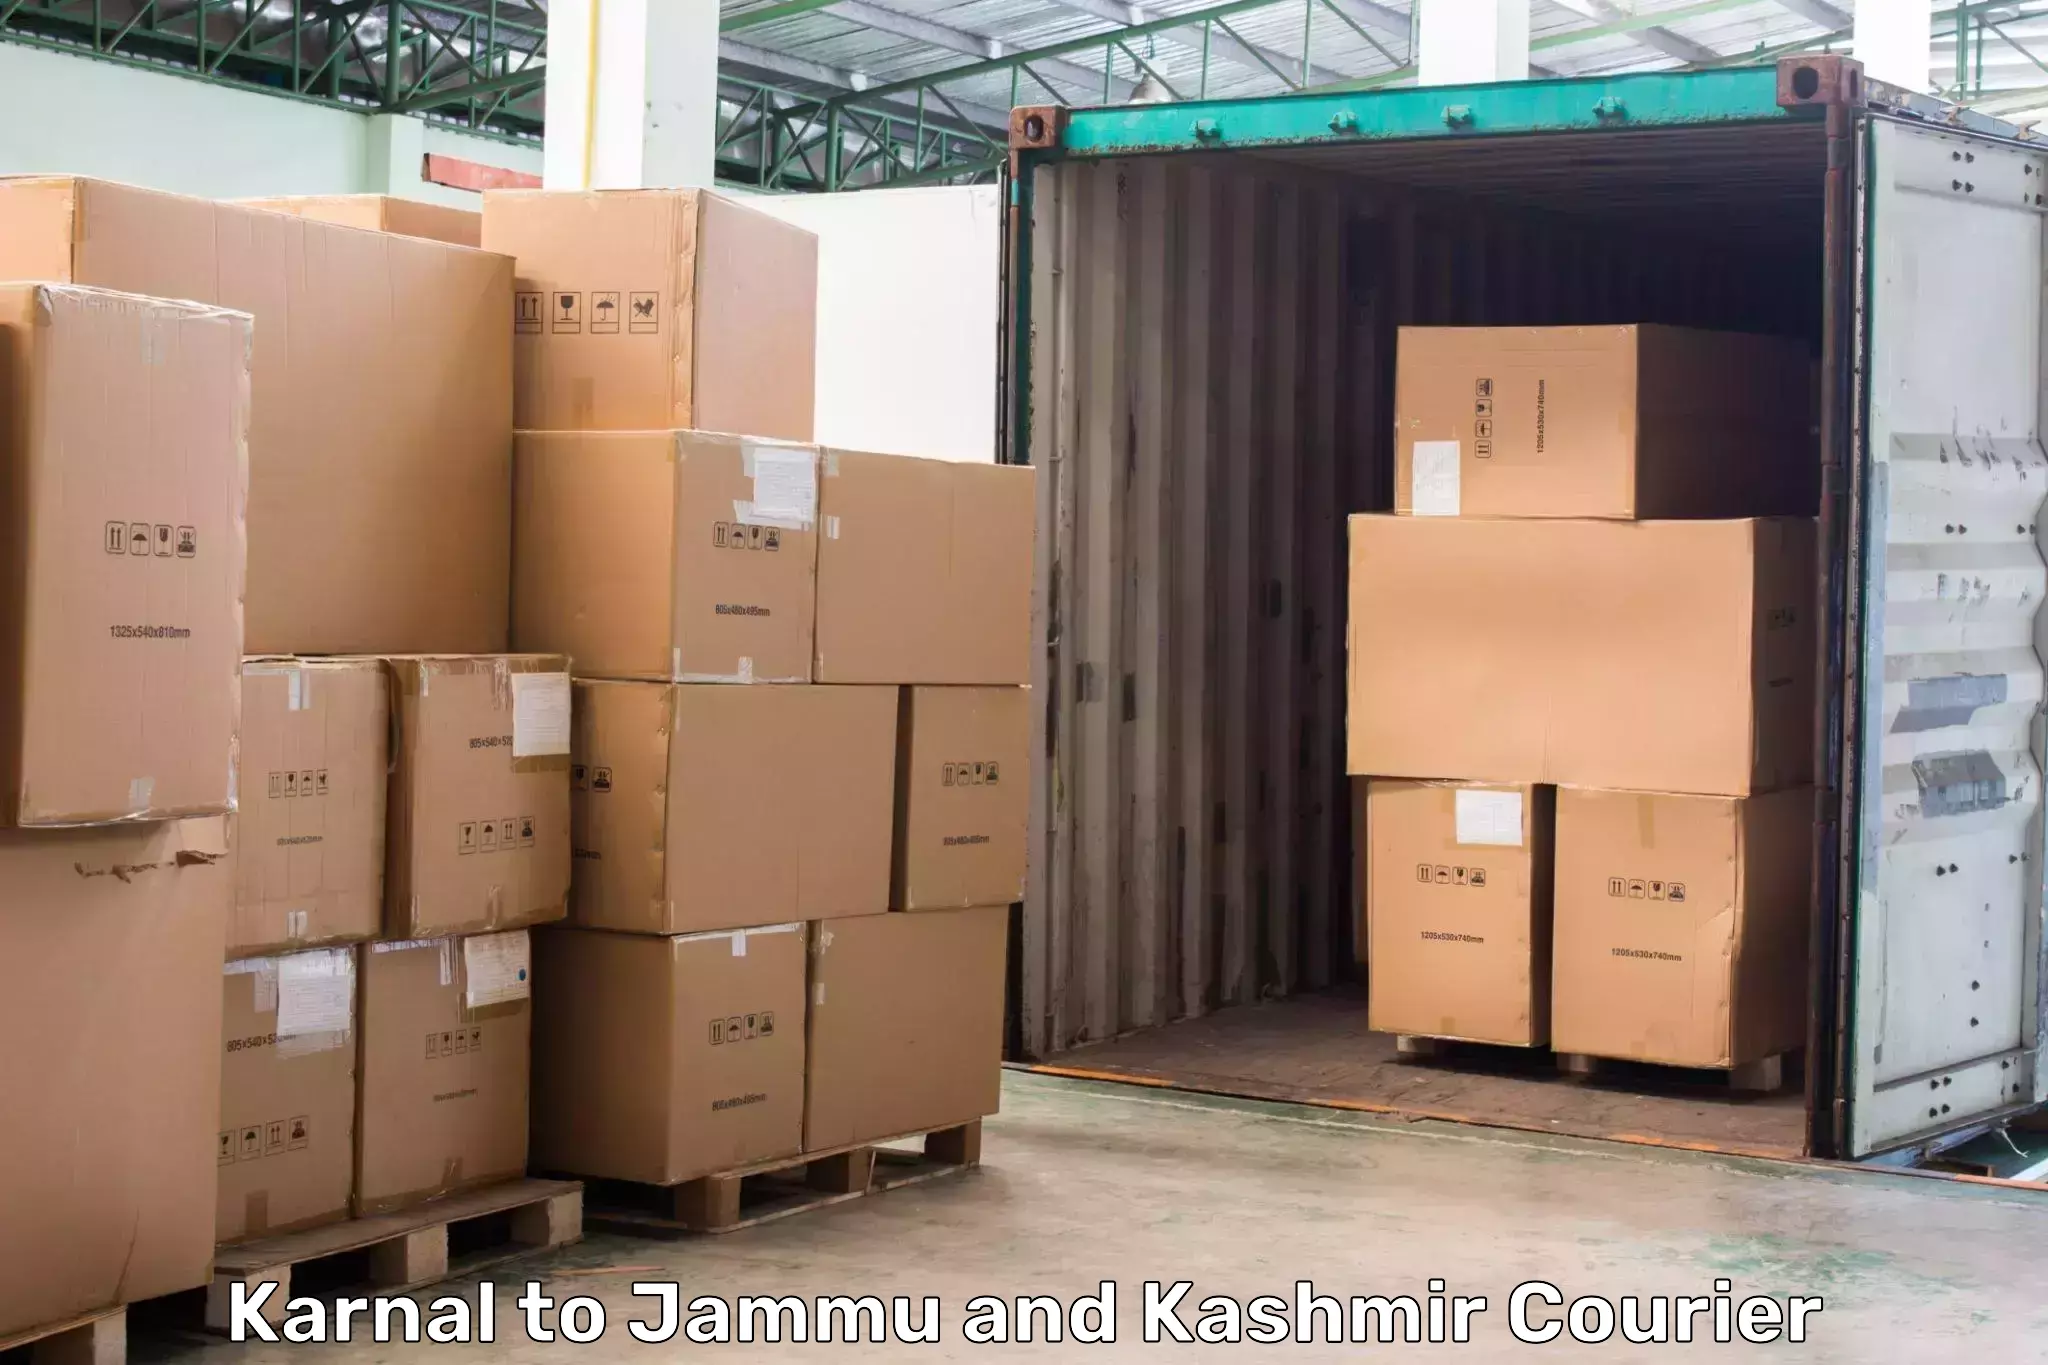 High-priority parcel service Karnal to Baramulla